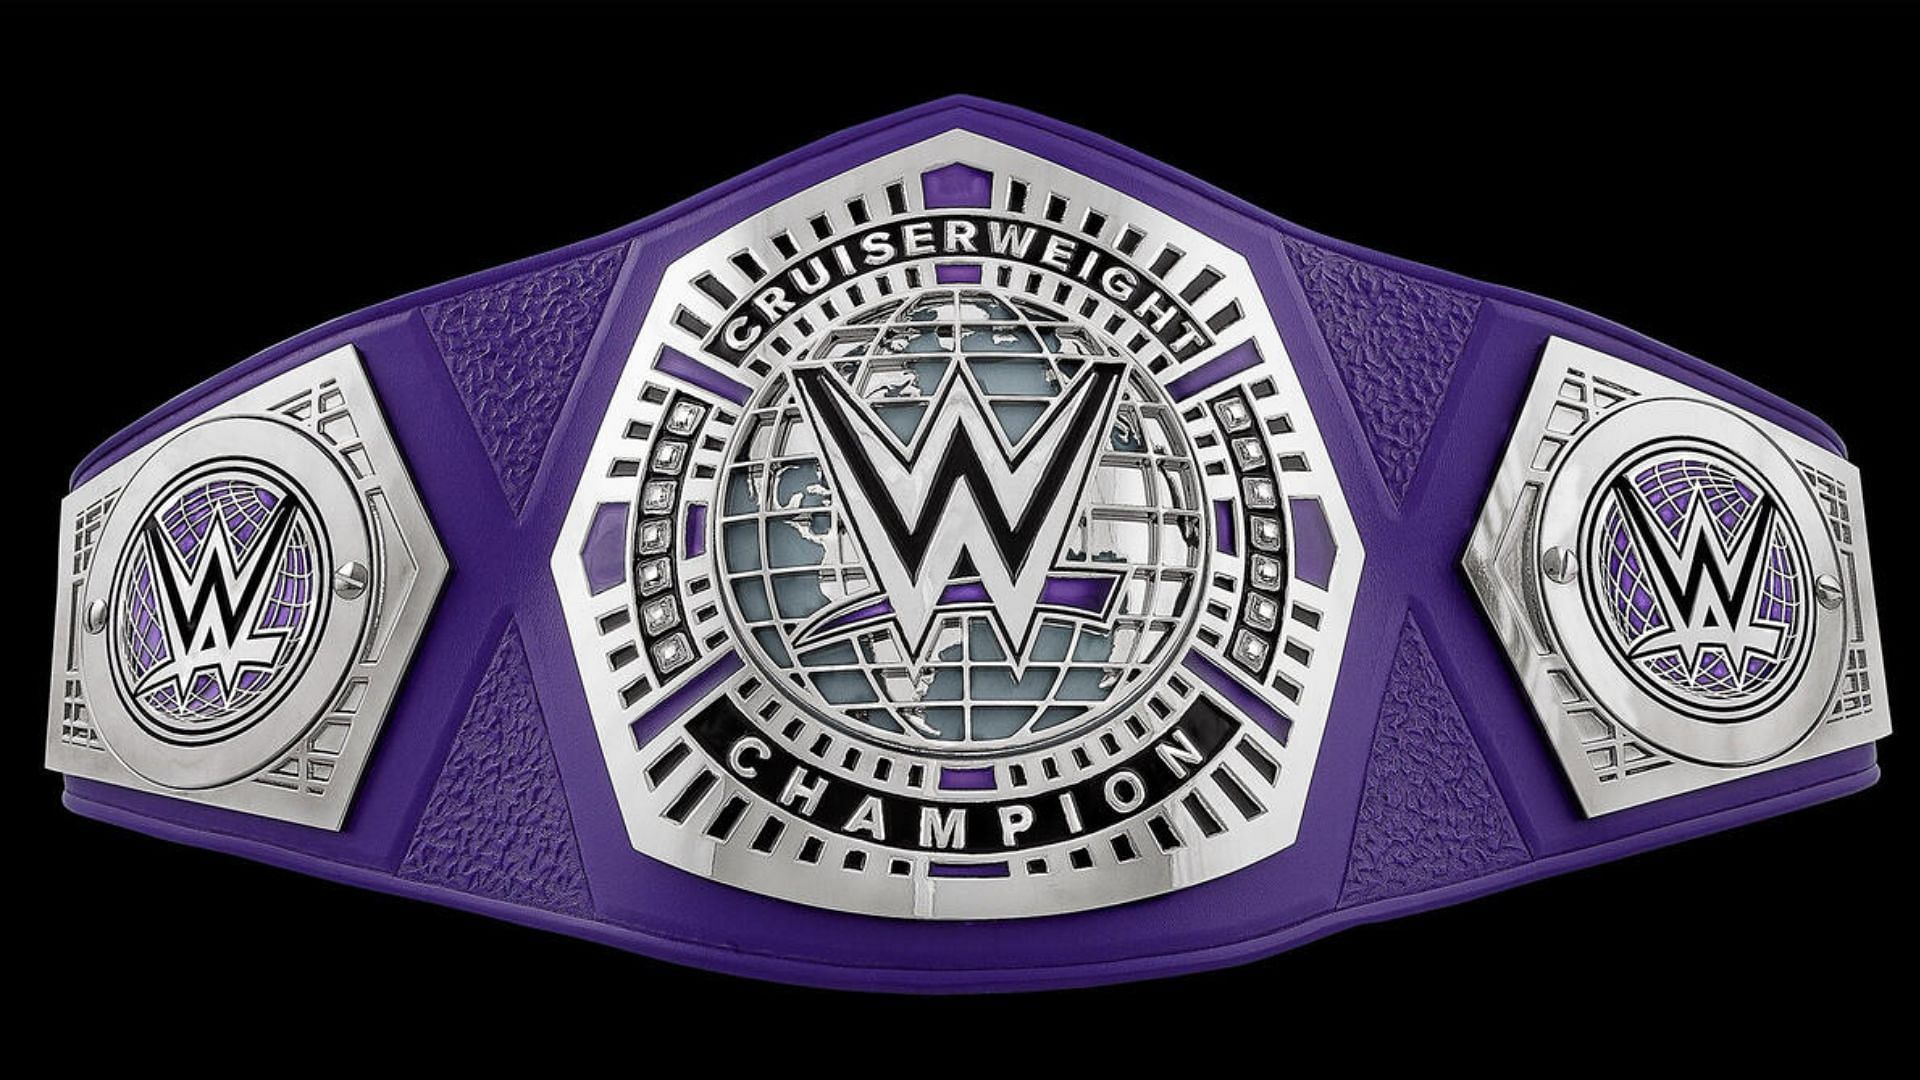 WWE revived the Cruiserweight divison in 2016!